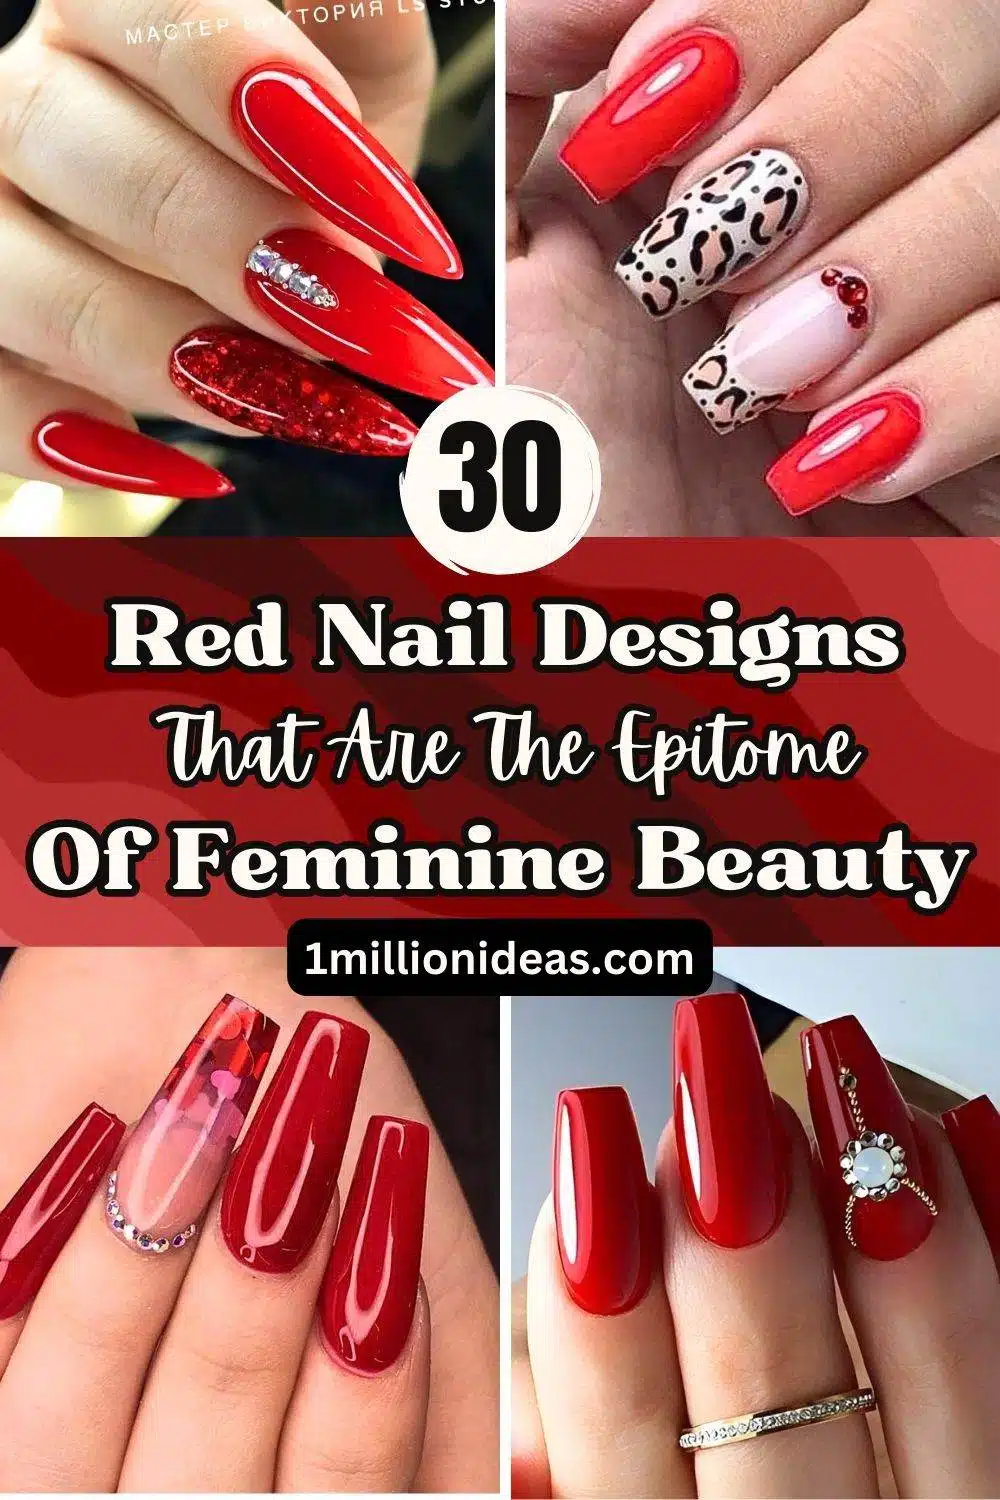 30 Red Nail Designs That Are The Epitome Of Feminine Beauty - 191